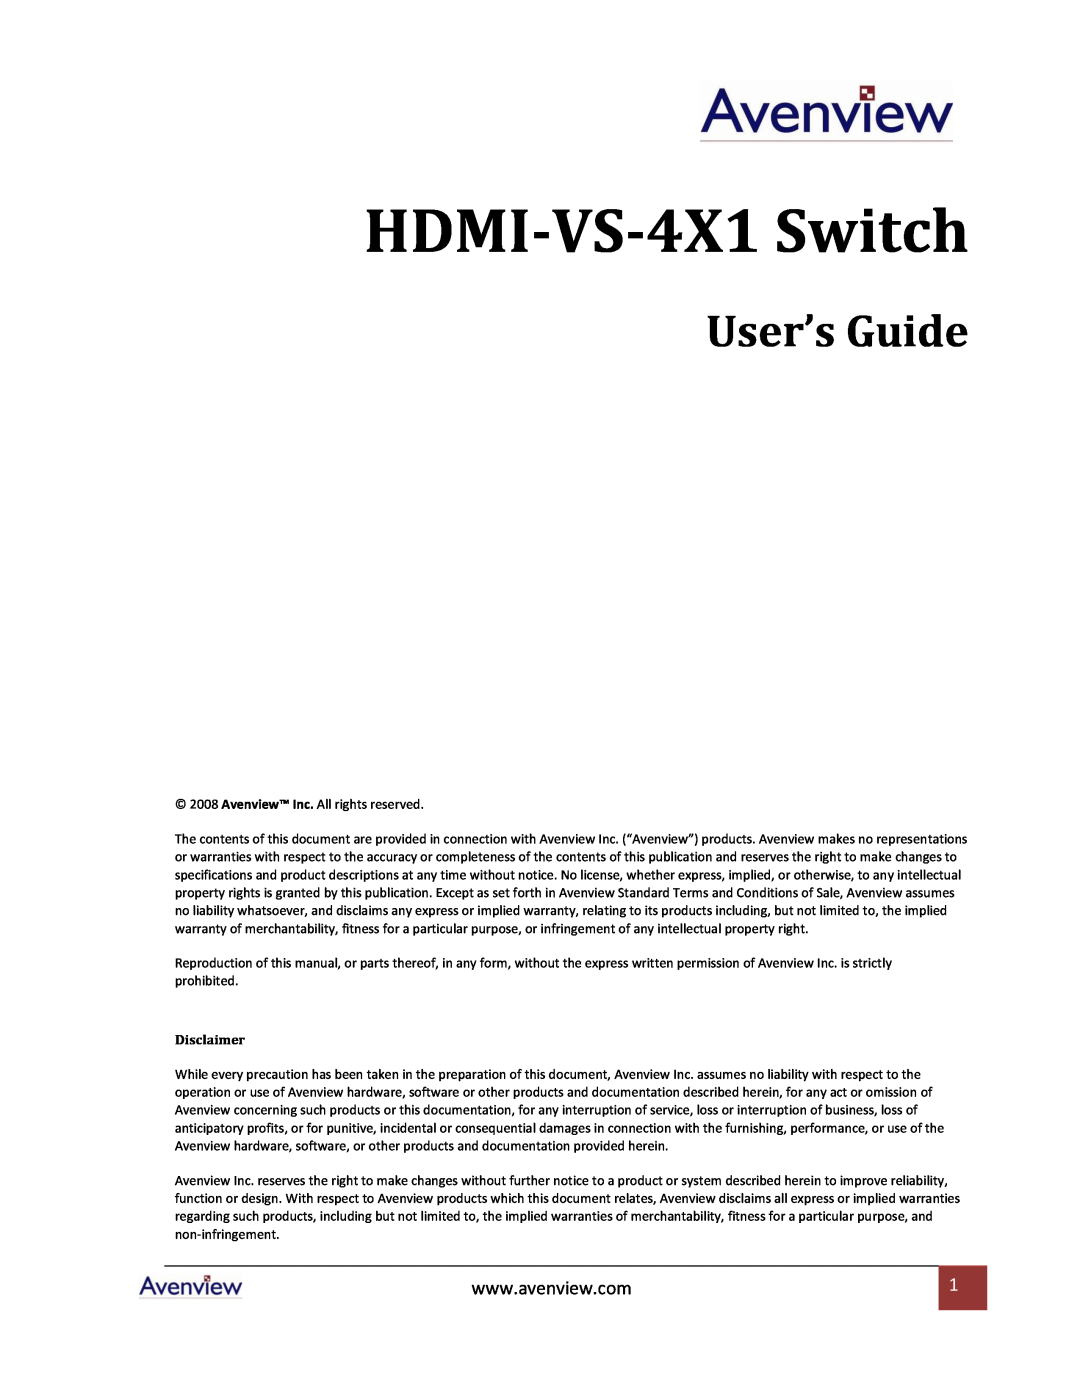 Avenview specifications HDMI-VS-4X1 Switch, User’s Guide, Disclaimer 